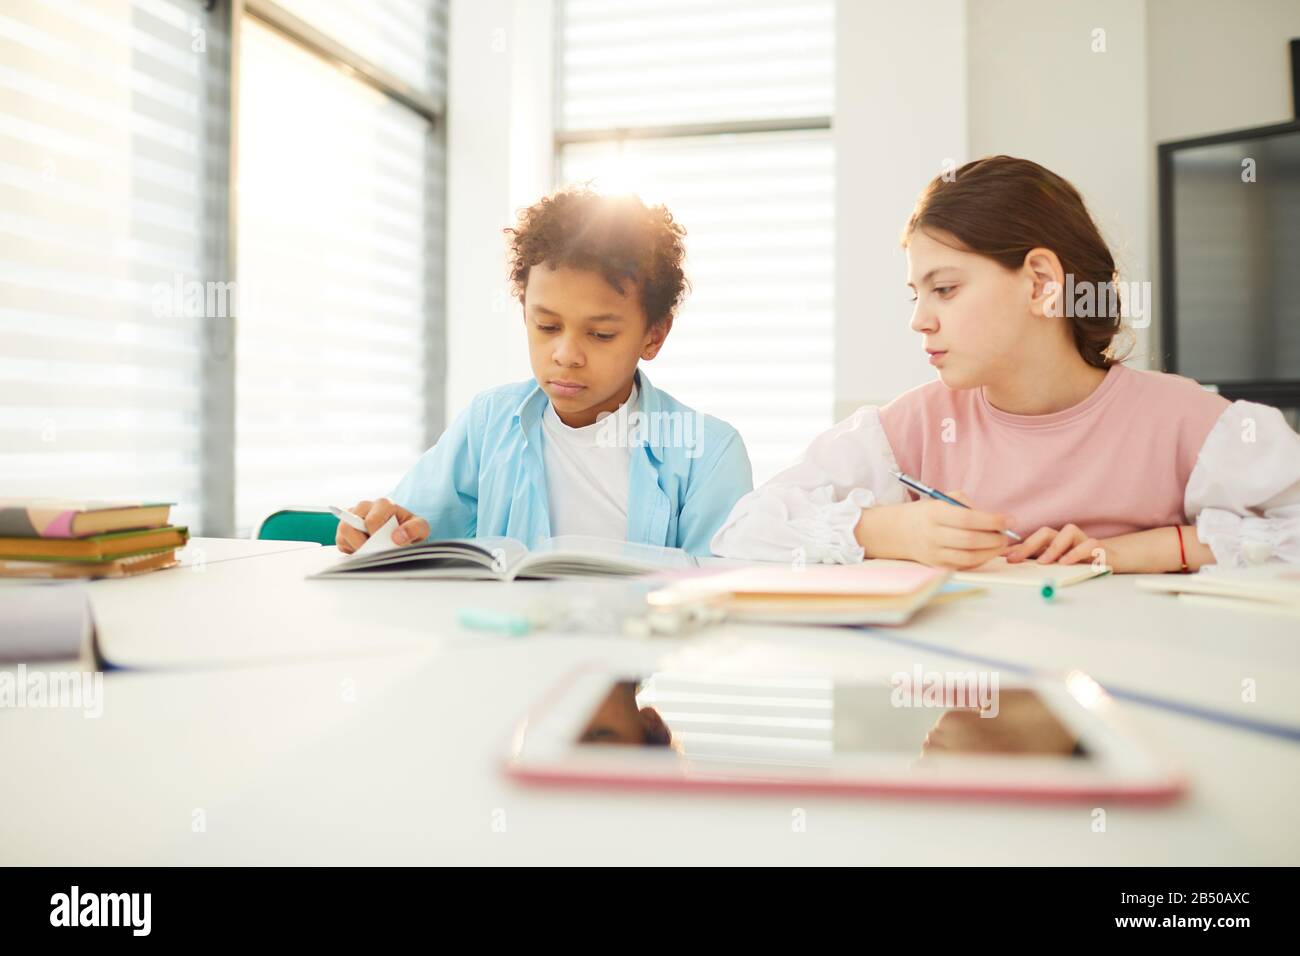 African American boy and Caucasian girl sitting together at school desk in modern classroom, girl looking at boy's textbook, copy space Stock Photo